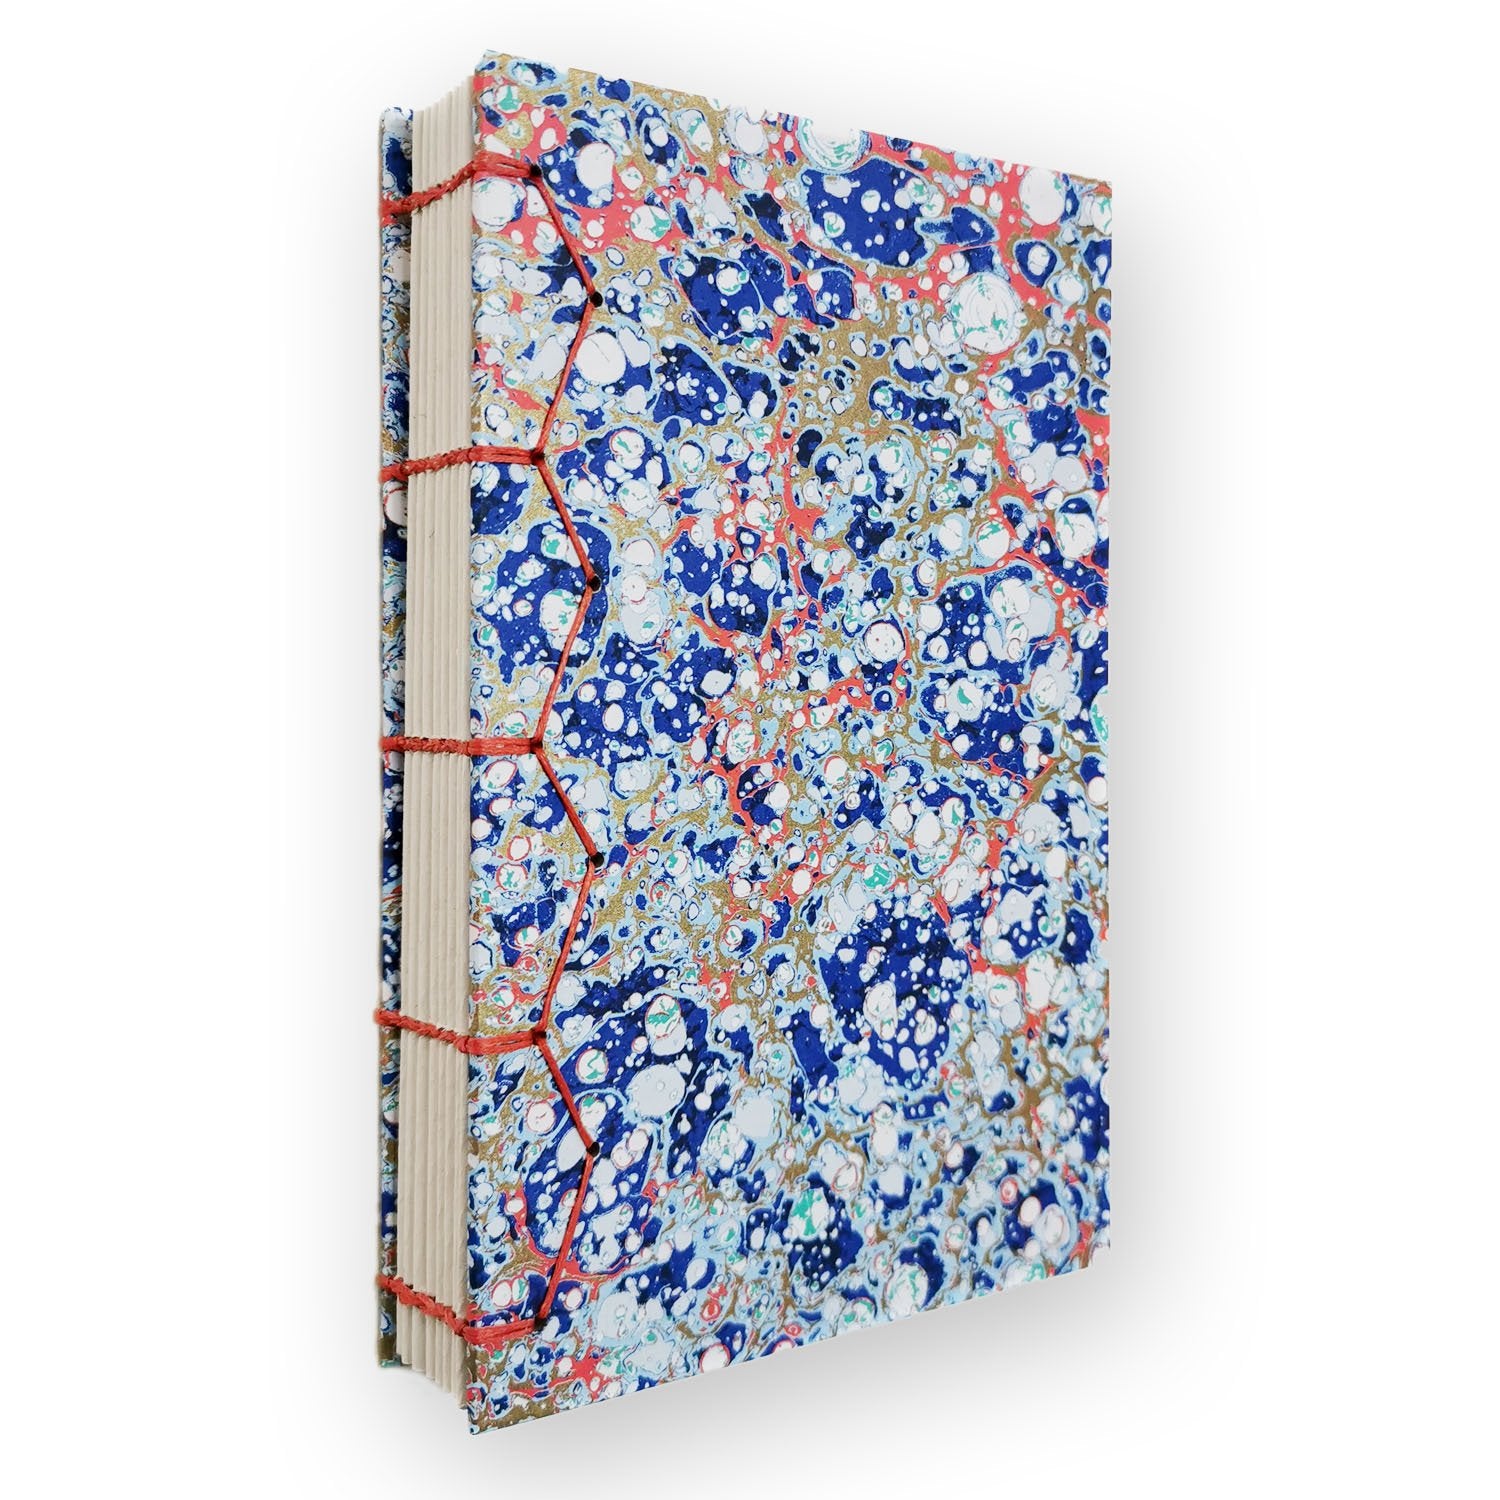 2023 Daily Calendar with Byzantine Binding - Marbled Blue